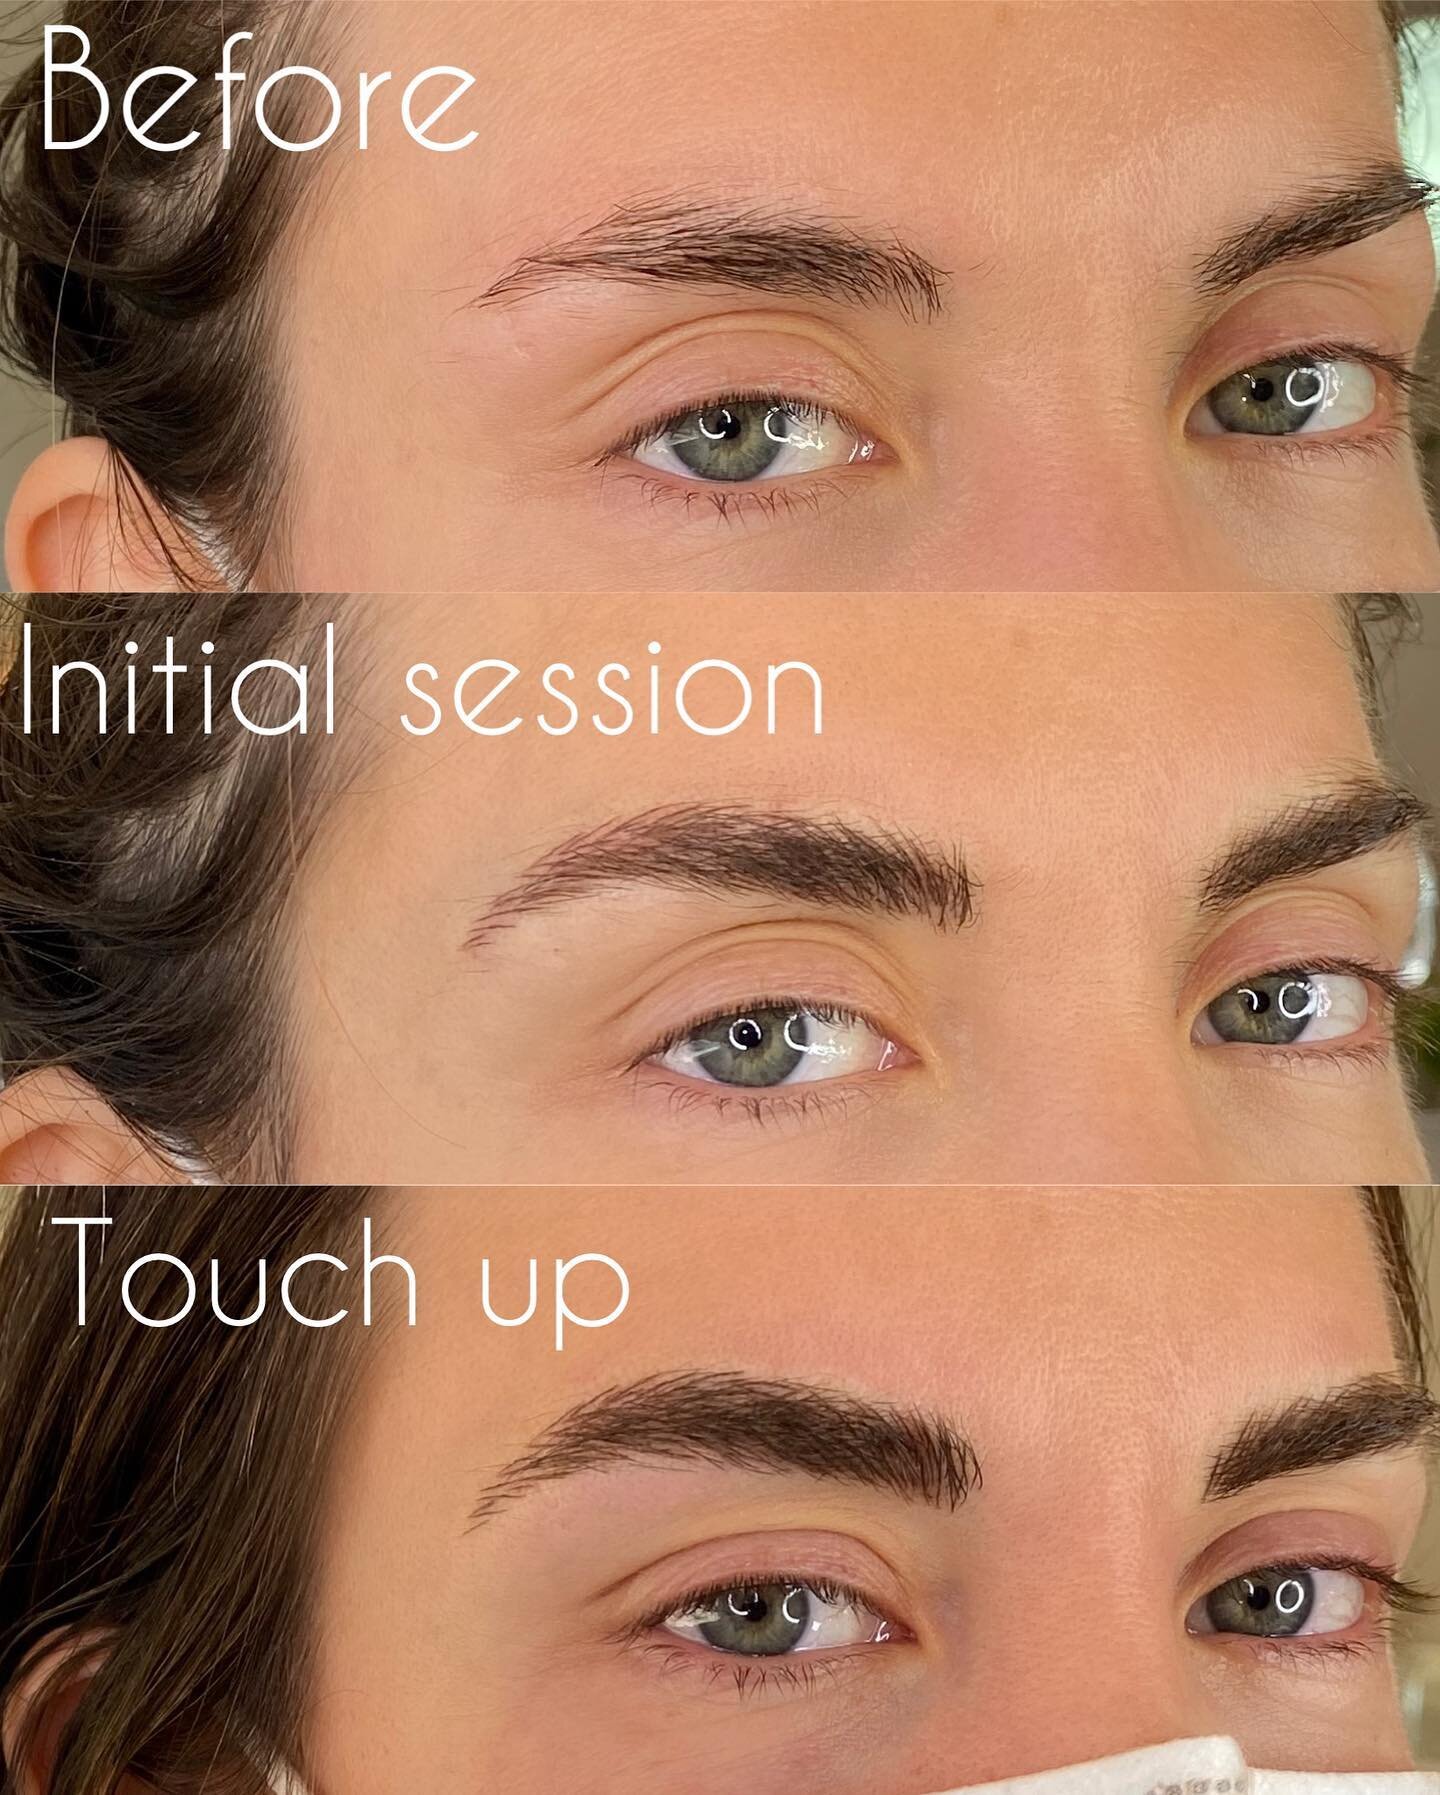 Microblading on my dear friend Kelsey! 

Here you can see the progression of building up the brow and how important it is to come in for your touch up. Thanks for your trust Kels! 

Kelsey is an amazing artist - check out her ceramics 👉 @potheadcera